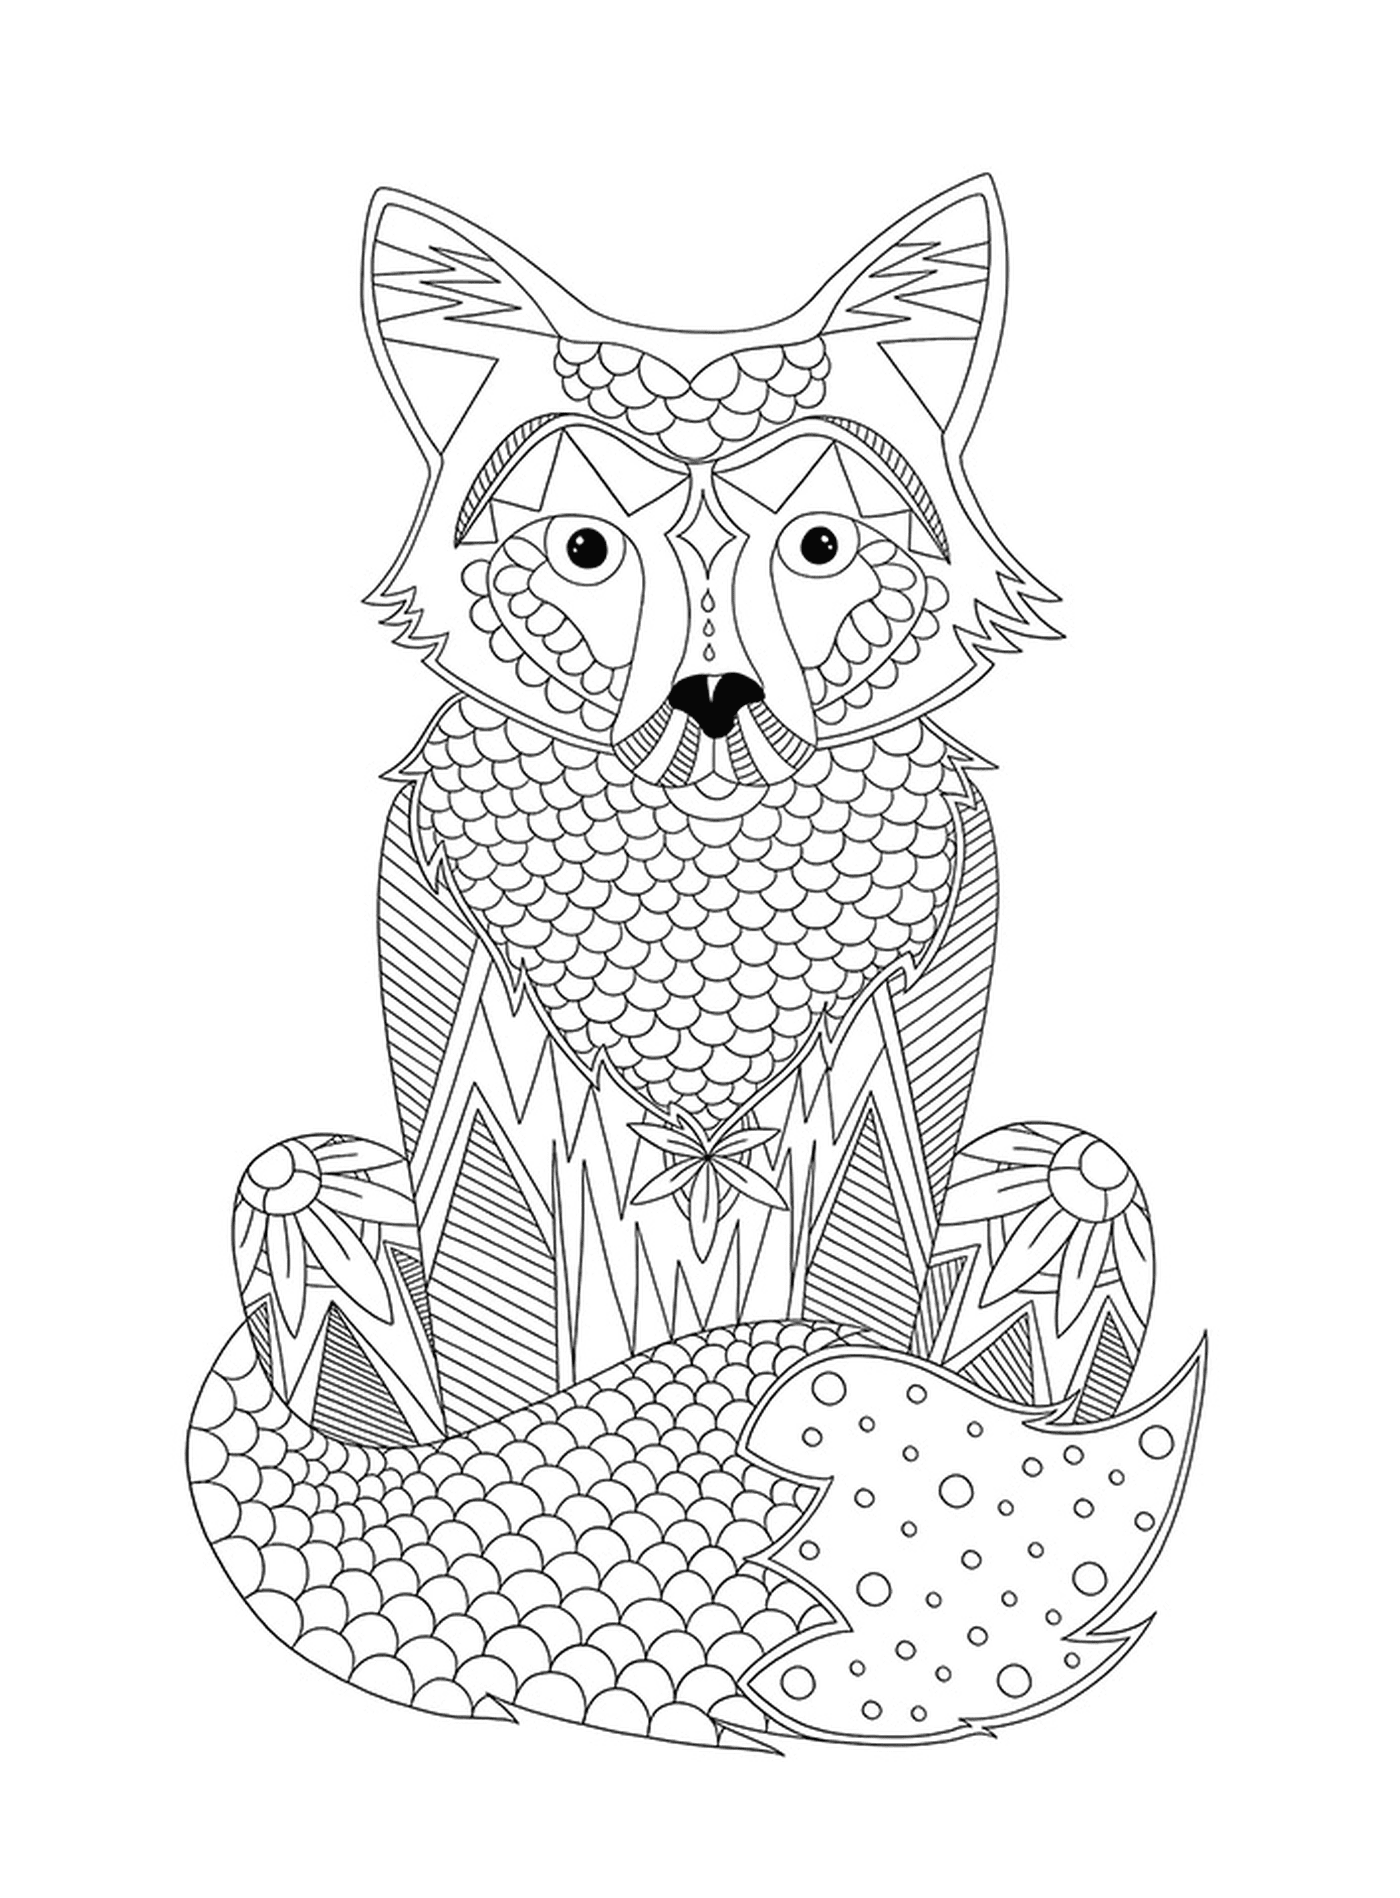  Fox sitting with patterns by Dinett 